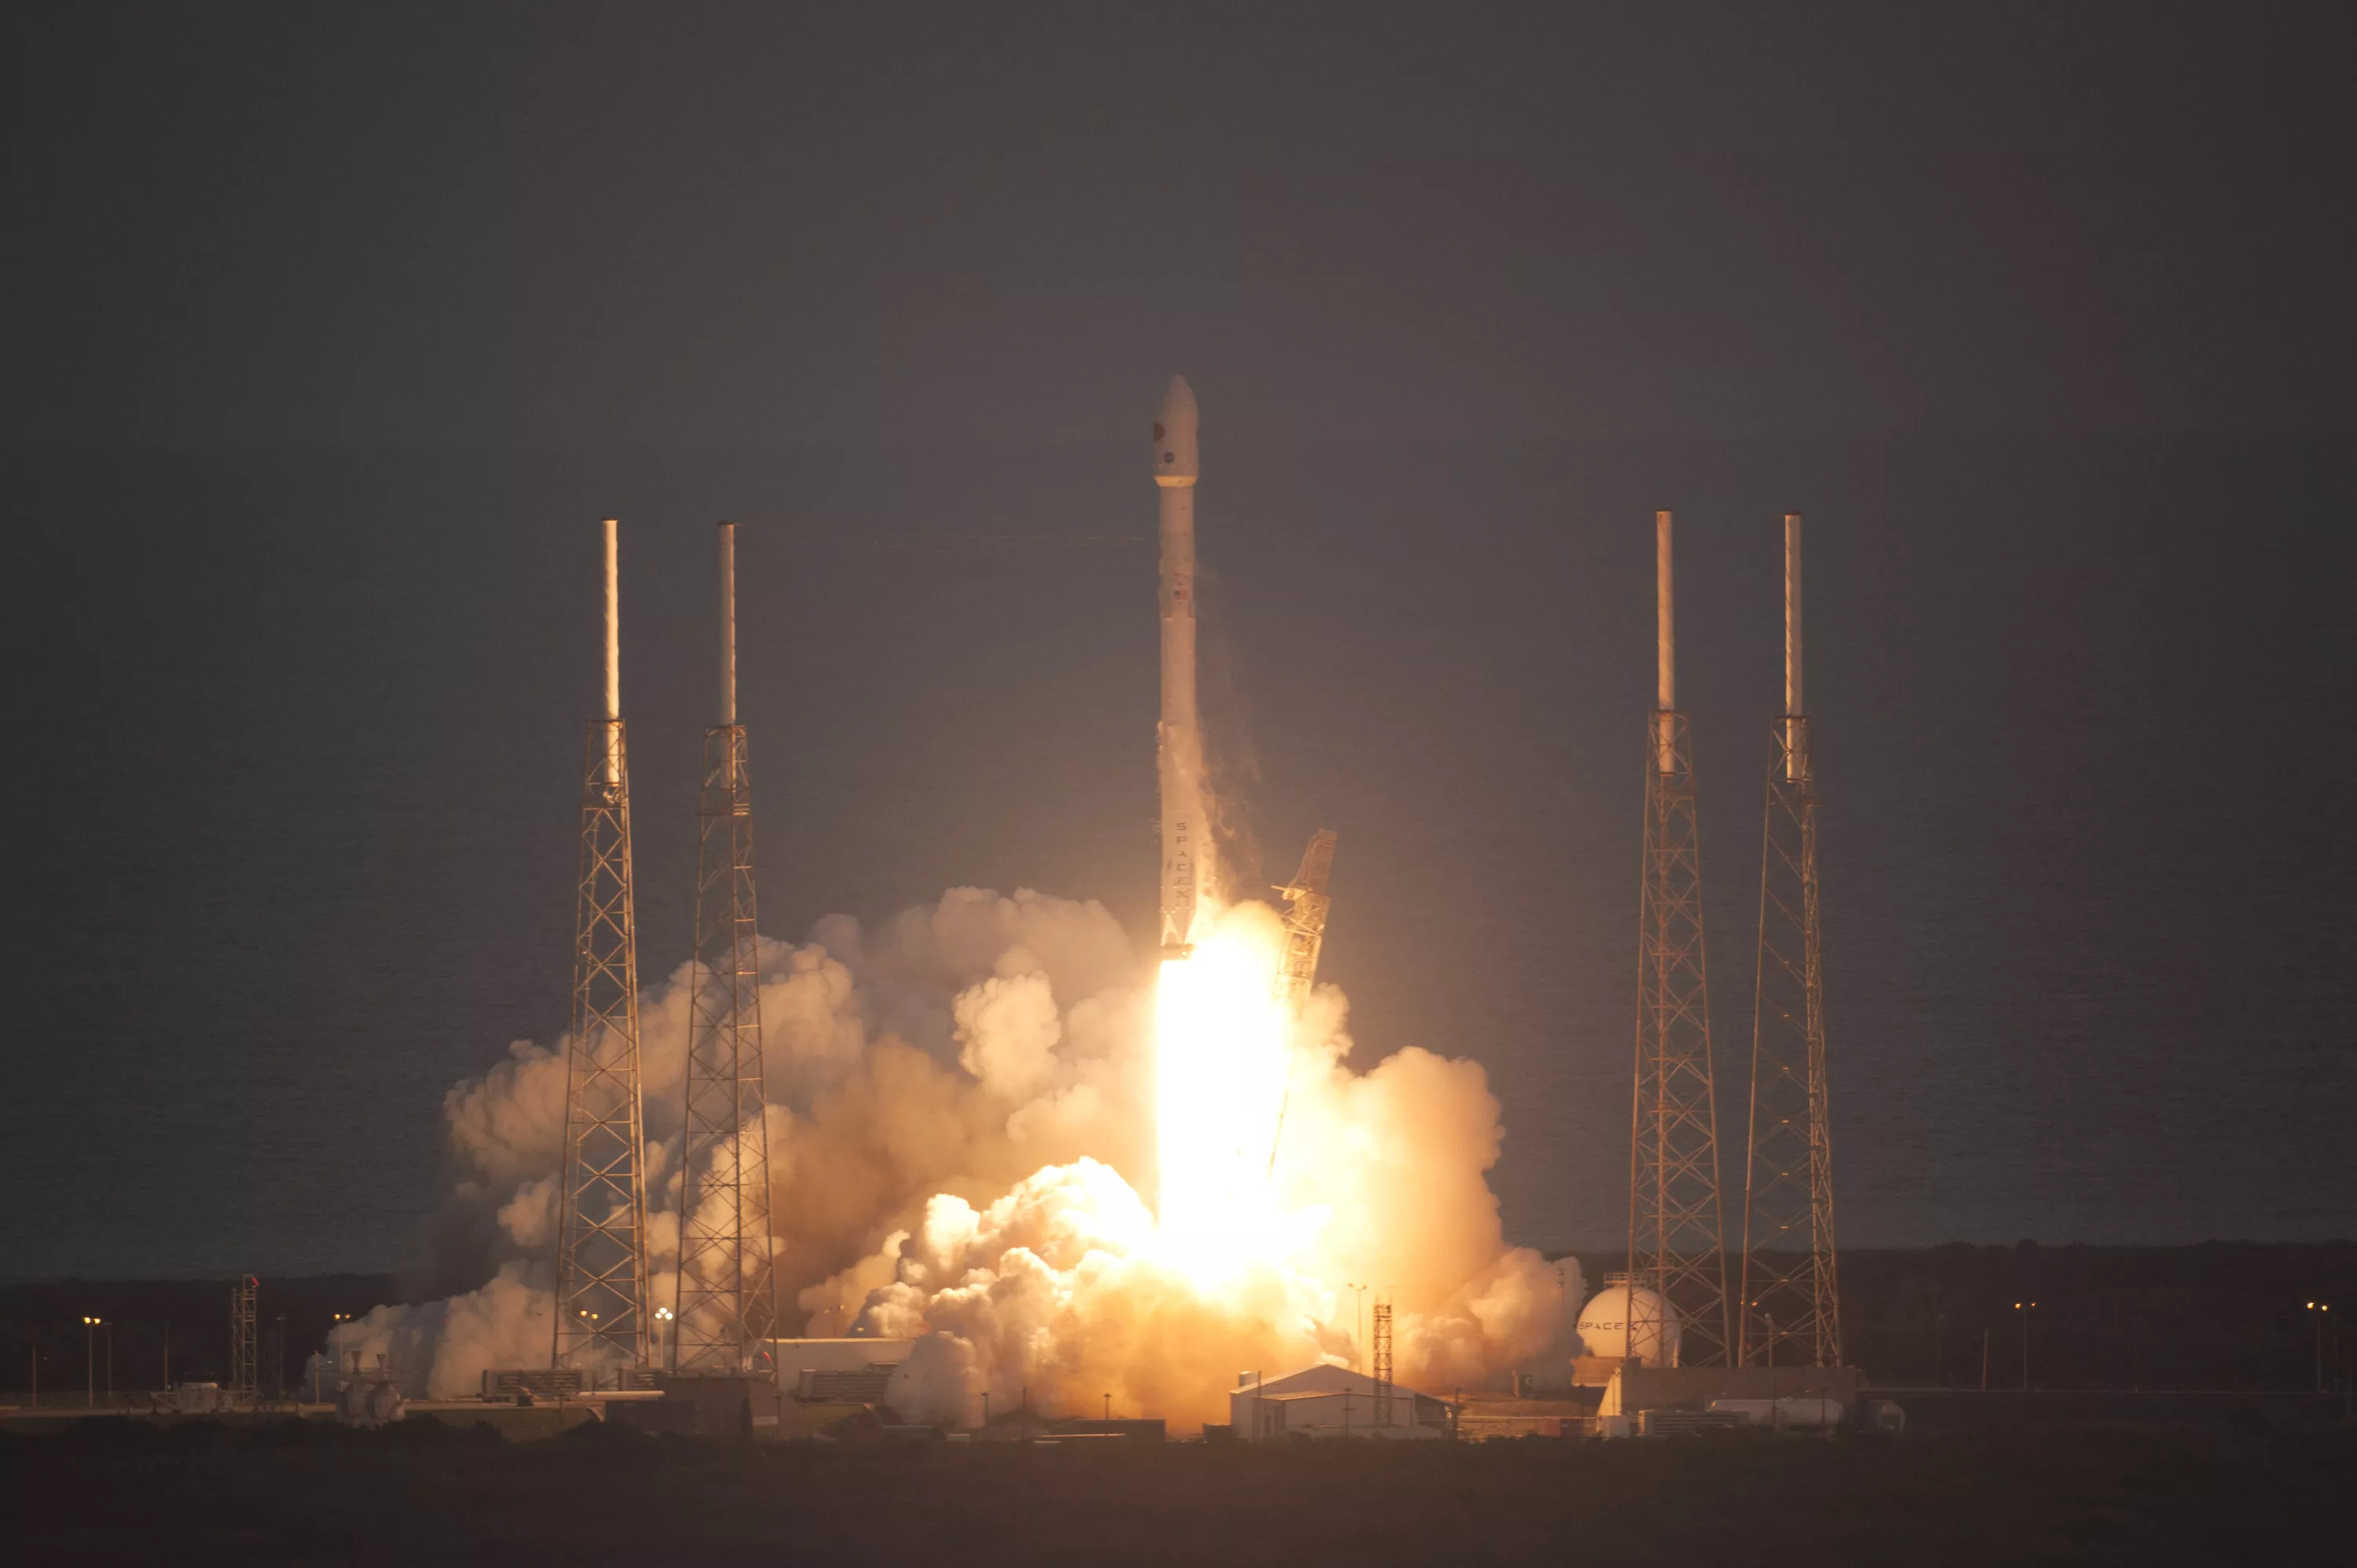 Image of a satellite launch